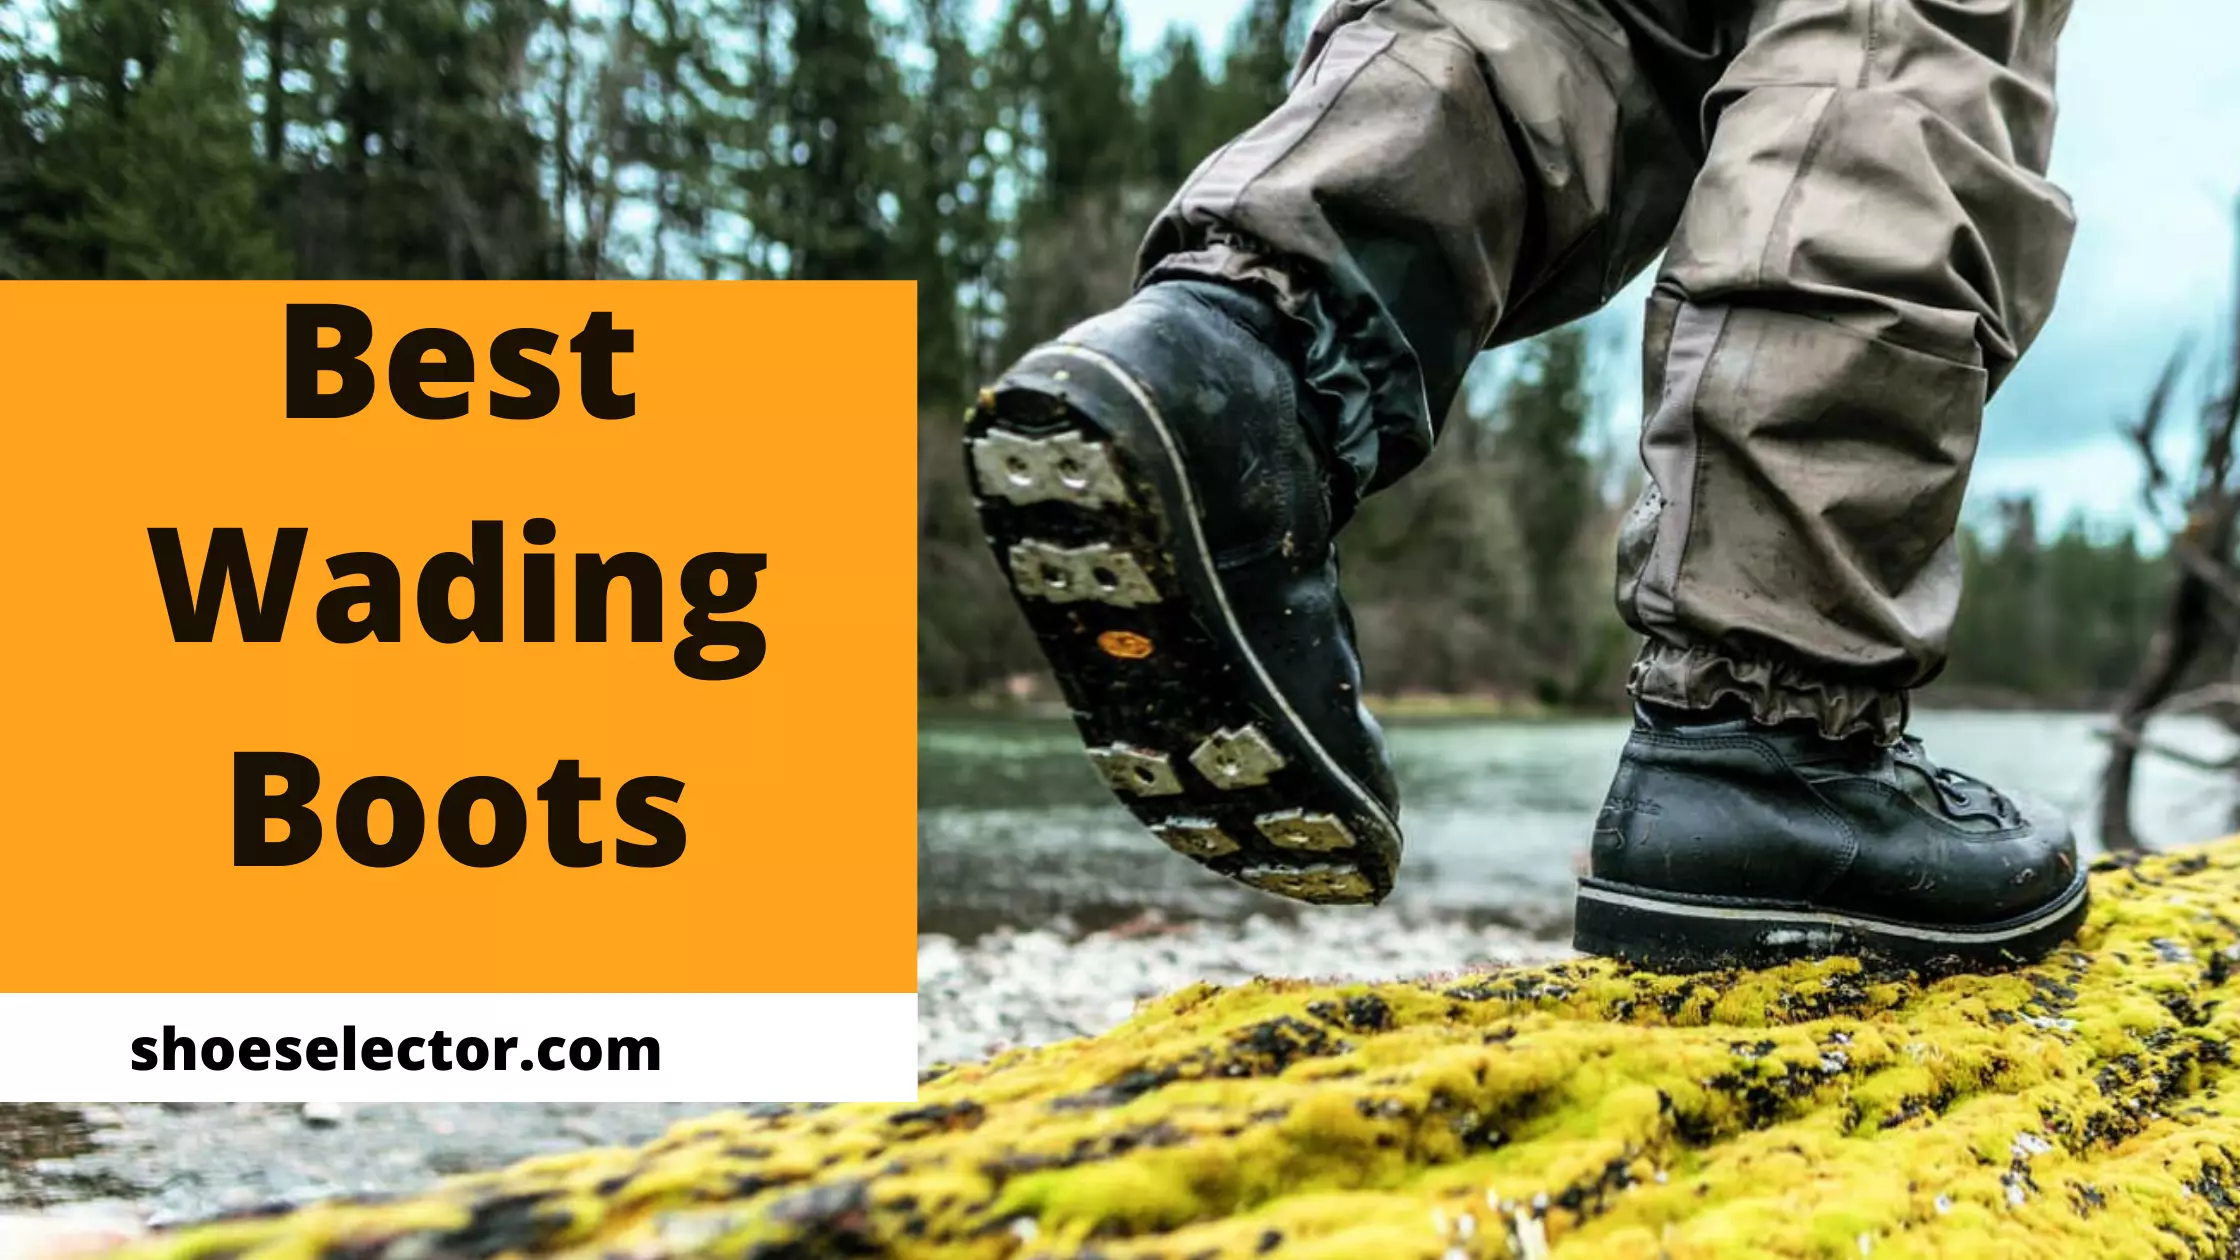 Best Wading Boots For Fishing - Top Brands Reviews